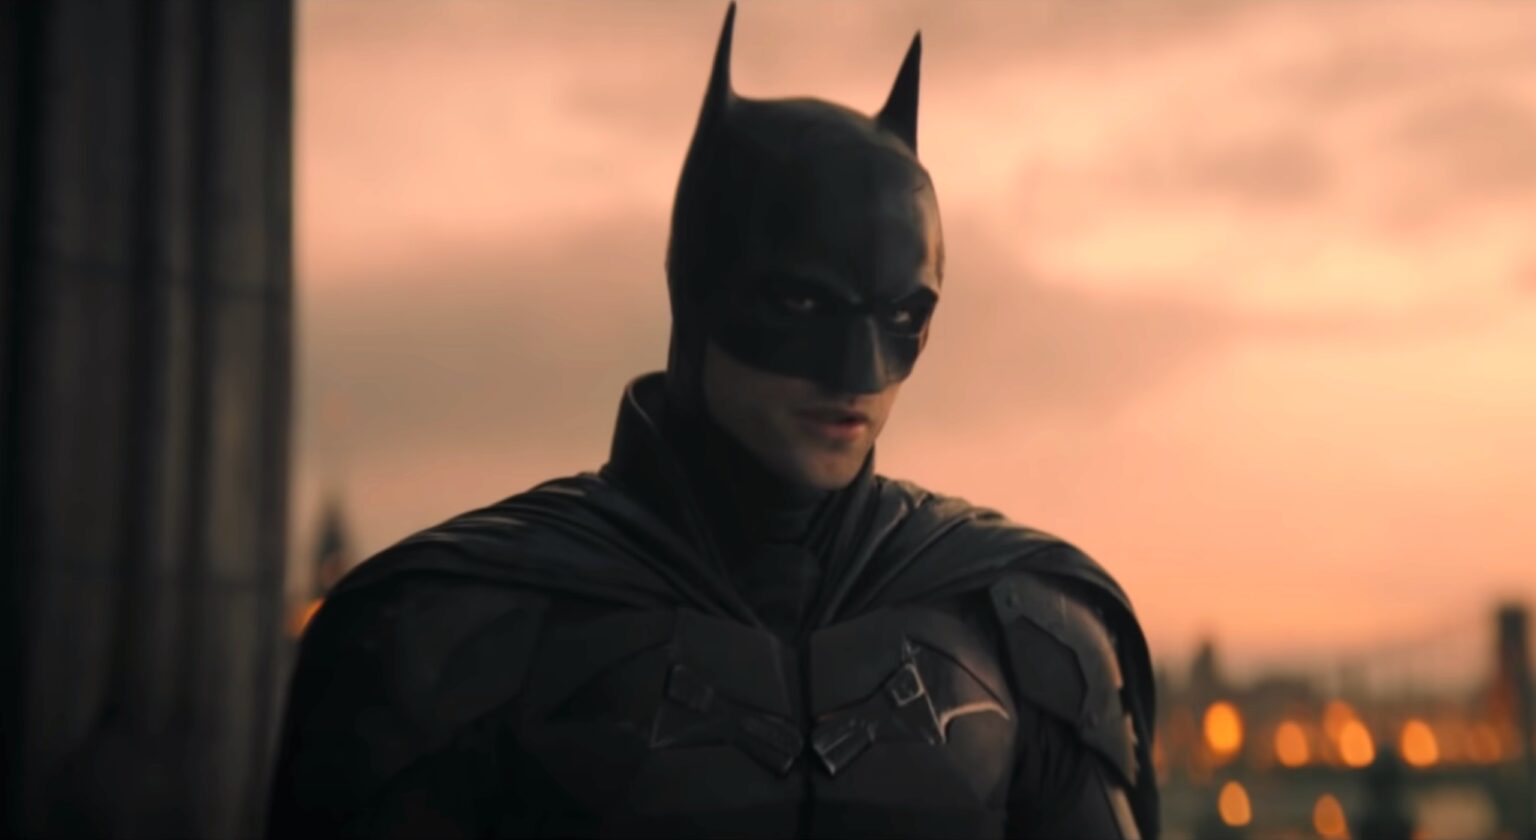 'The Batman' is finally here! Here’s How to stream the anticipated movie online for free on 123movies.